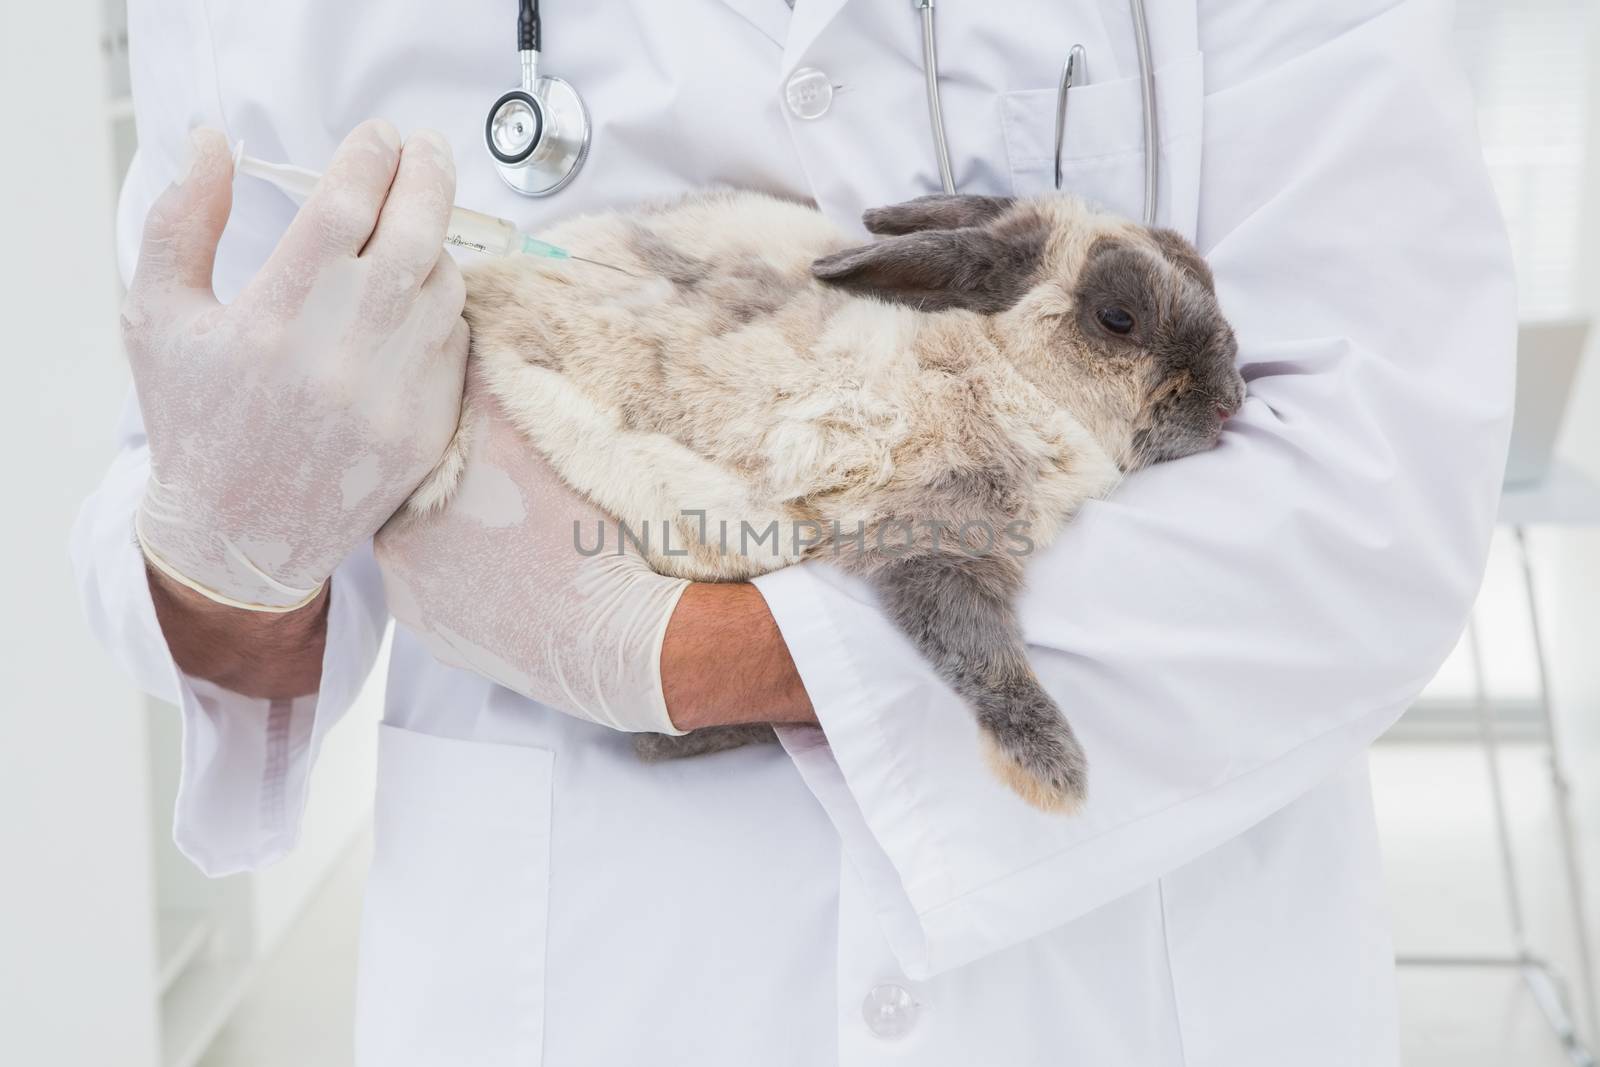 Veterinarian doing injection at a rabbit  by Wavebreakmedia